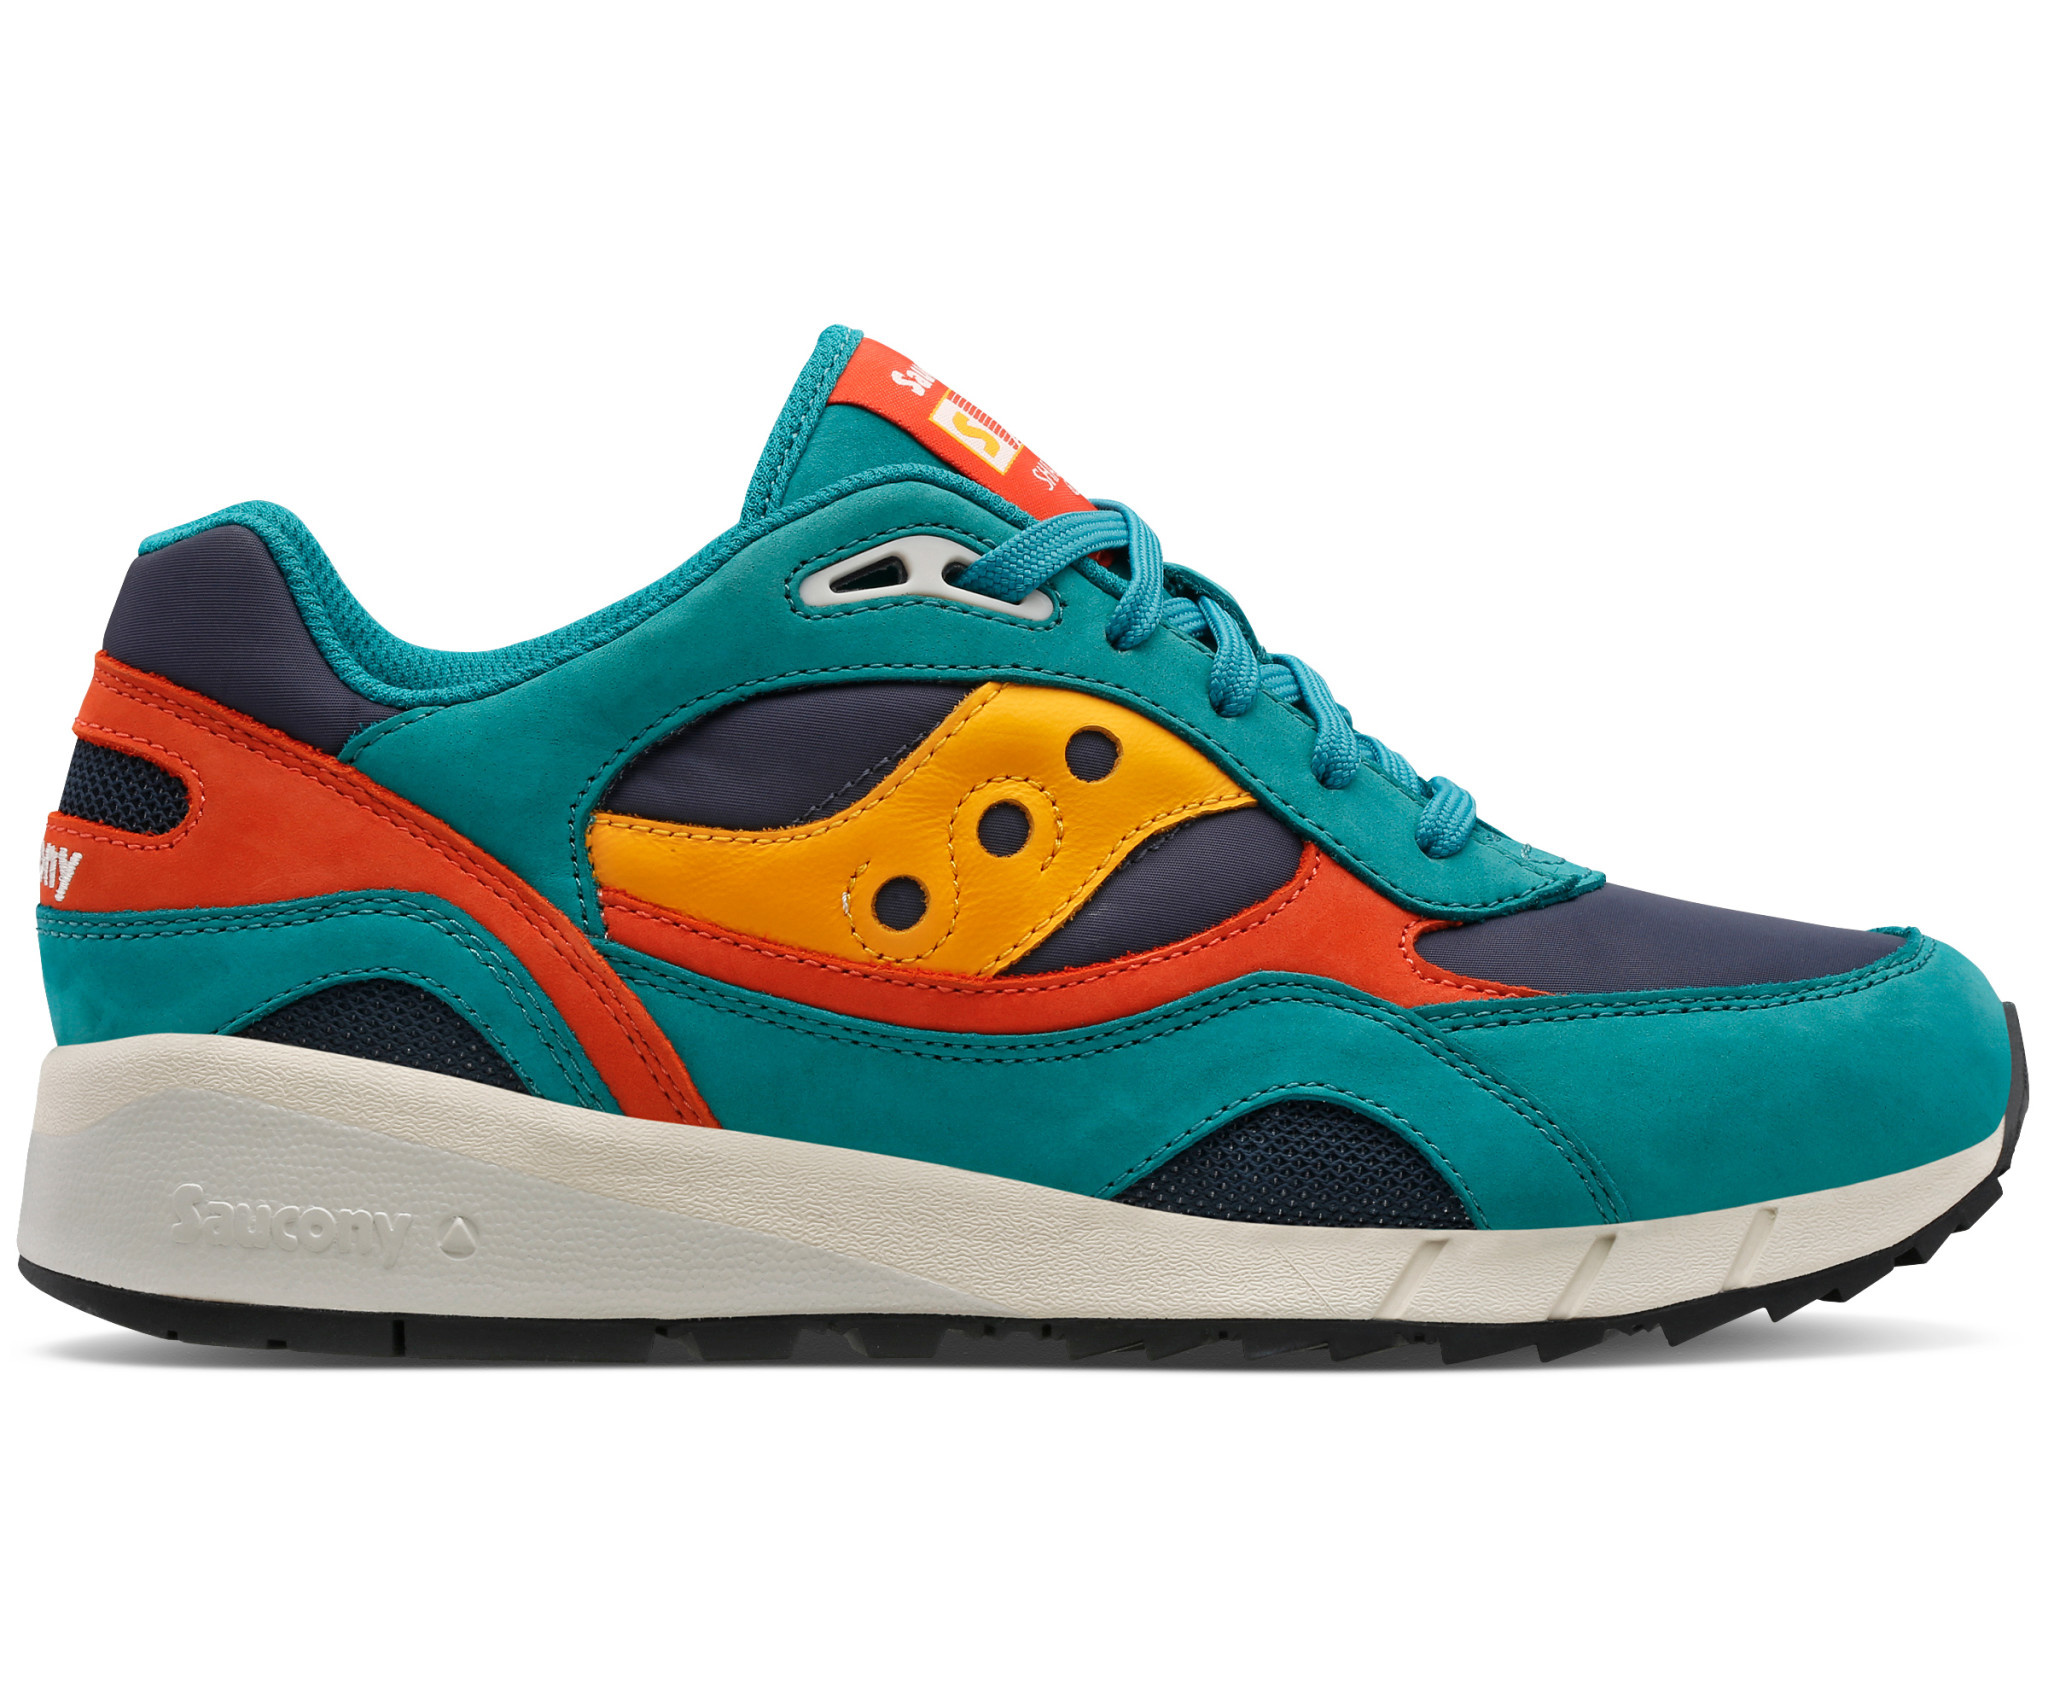 Shadow 6000 Teal/Blue - Eight One